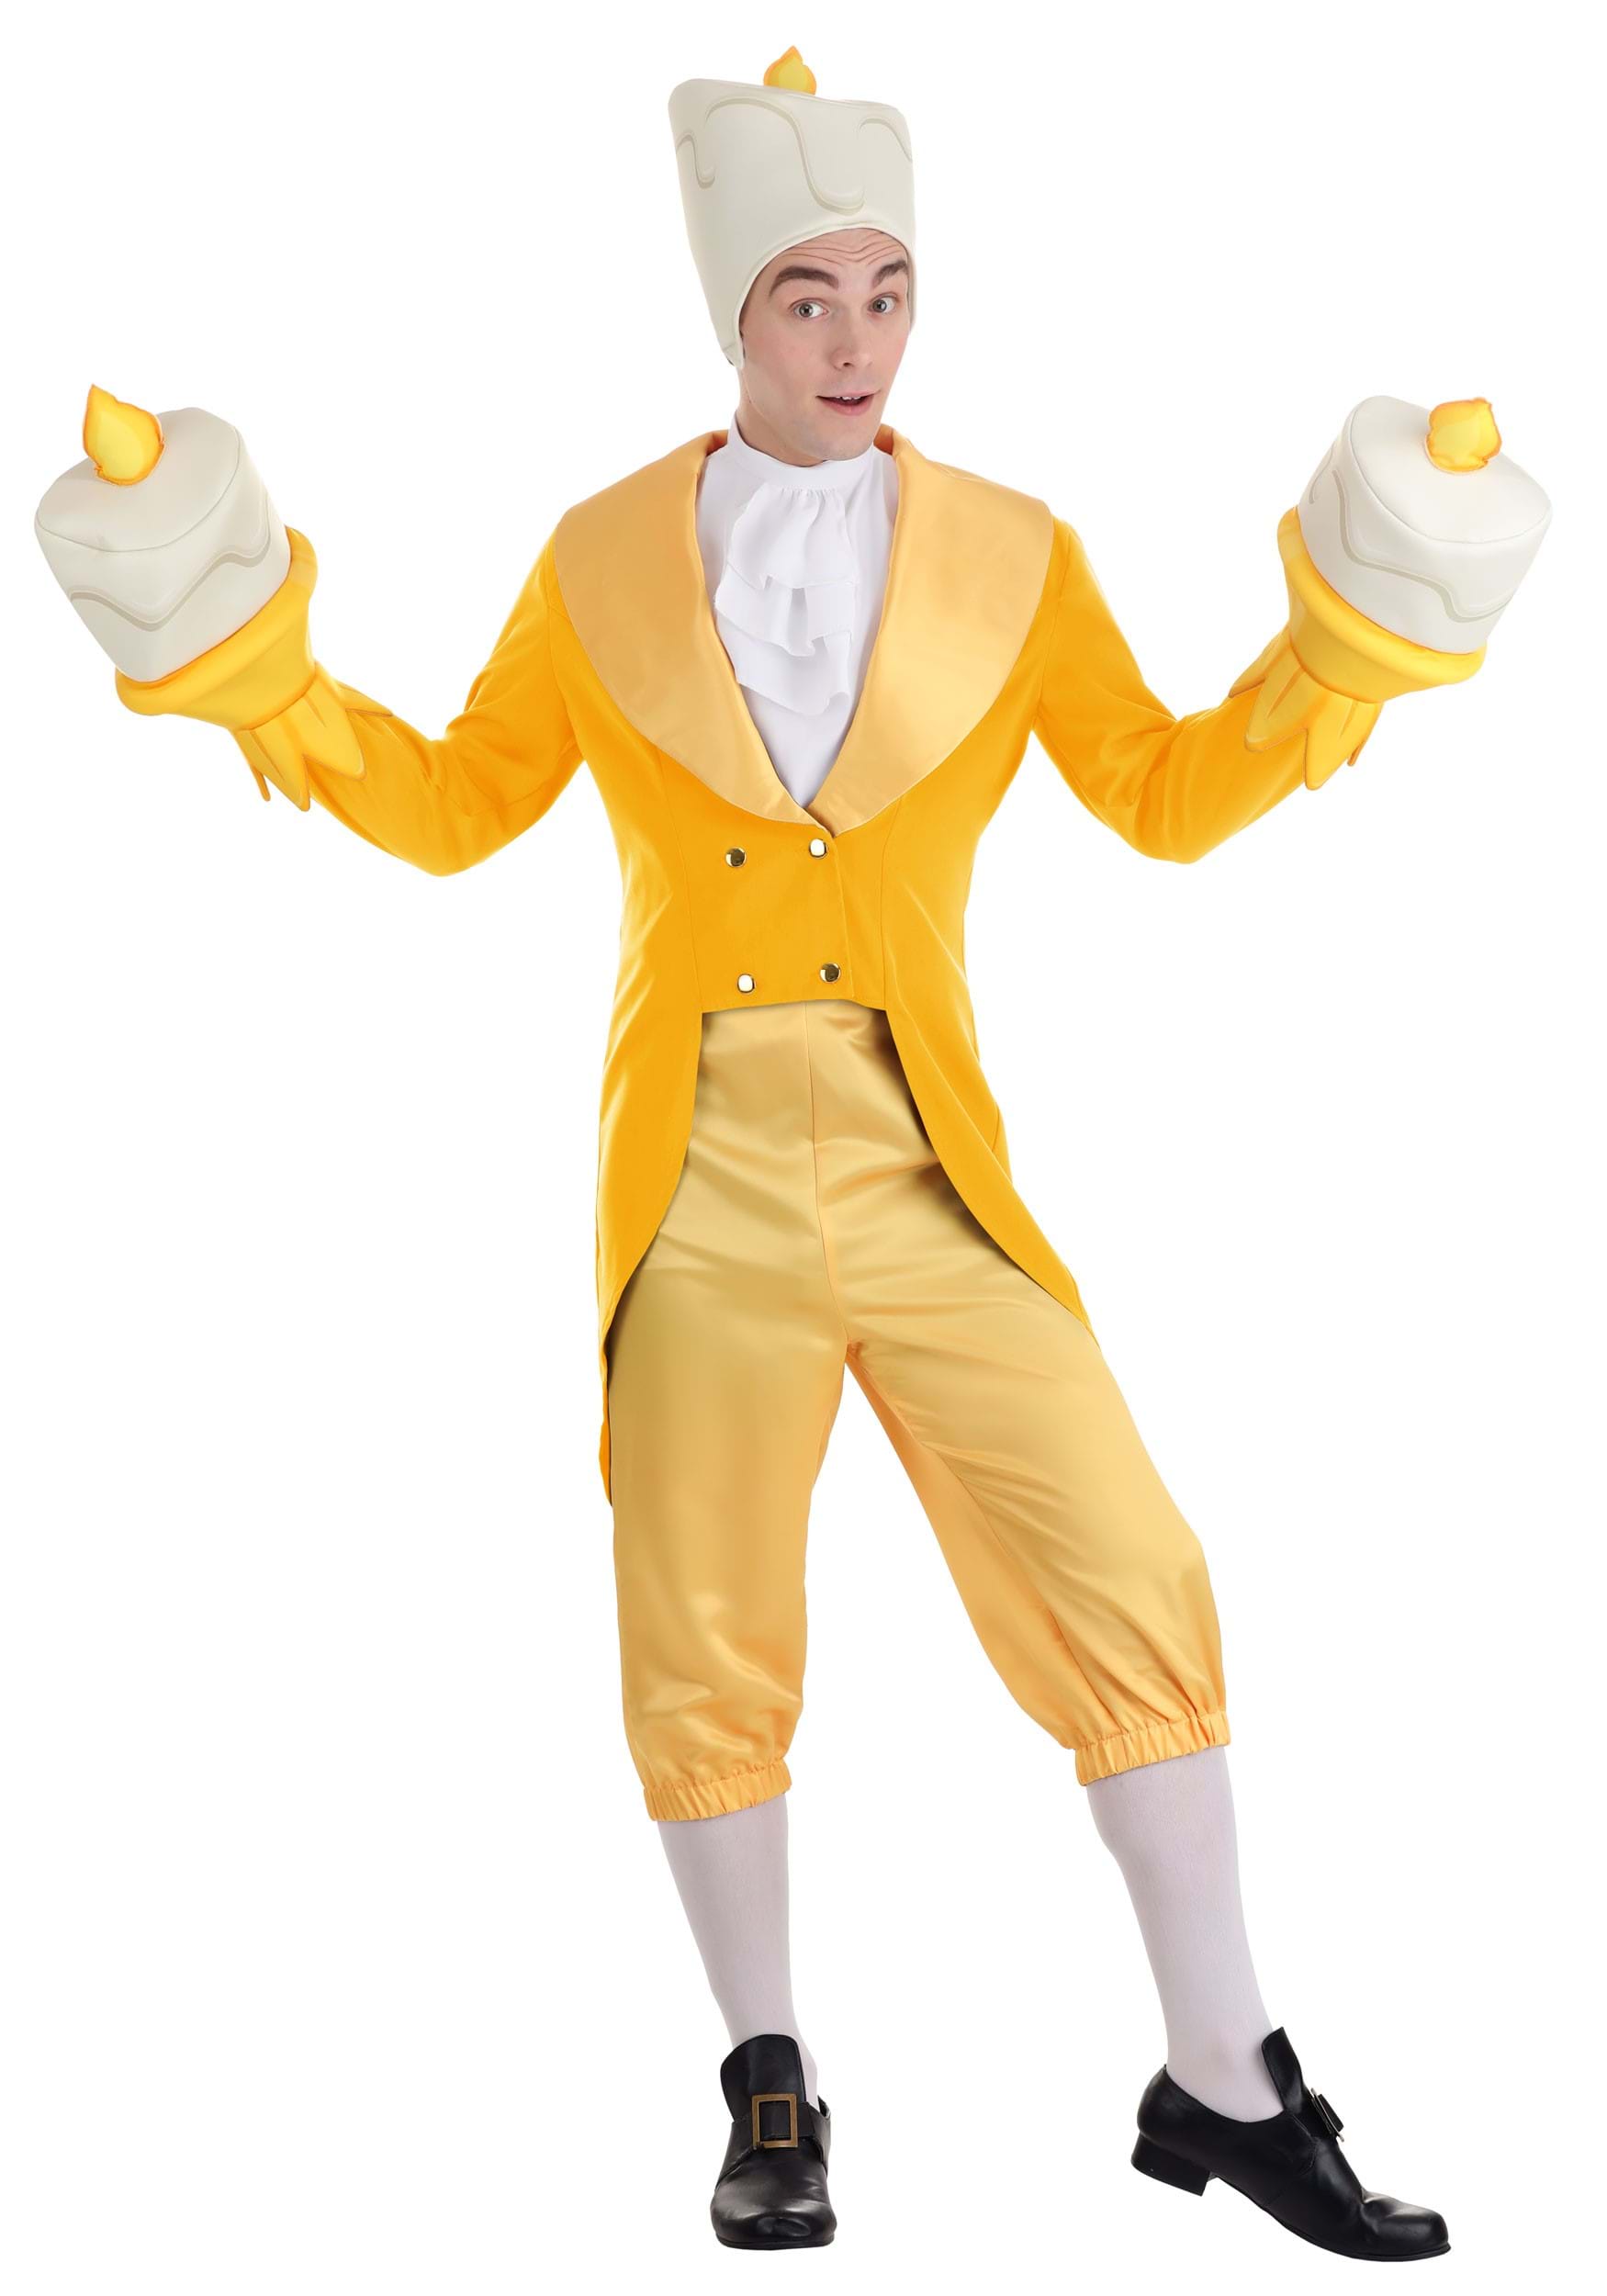 Photos - Fancy Dress FUN Costumes Men's Beauty and the Beast Lumiere Costume Orange/White&#